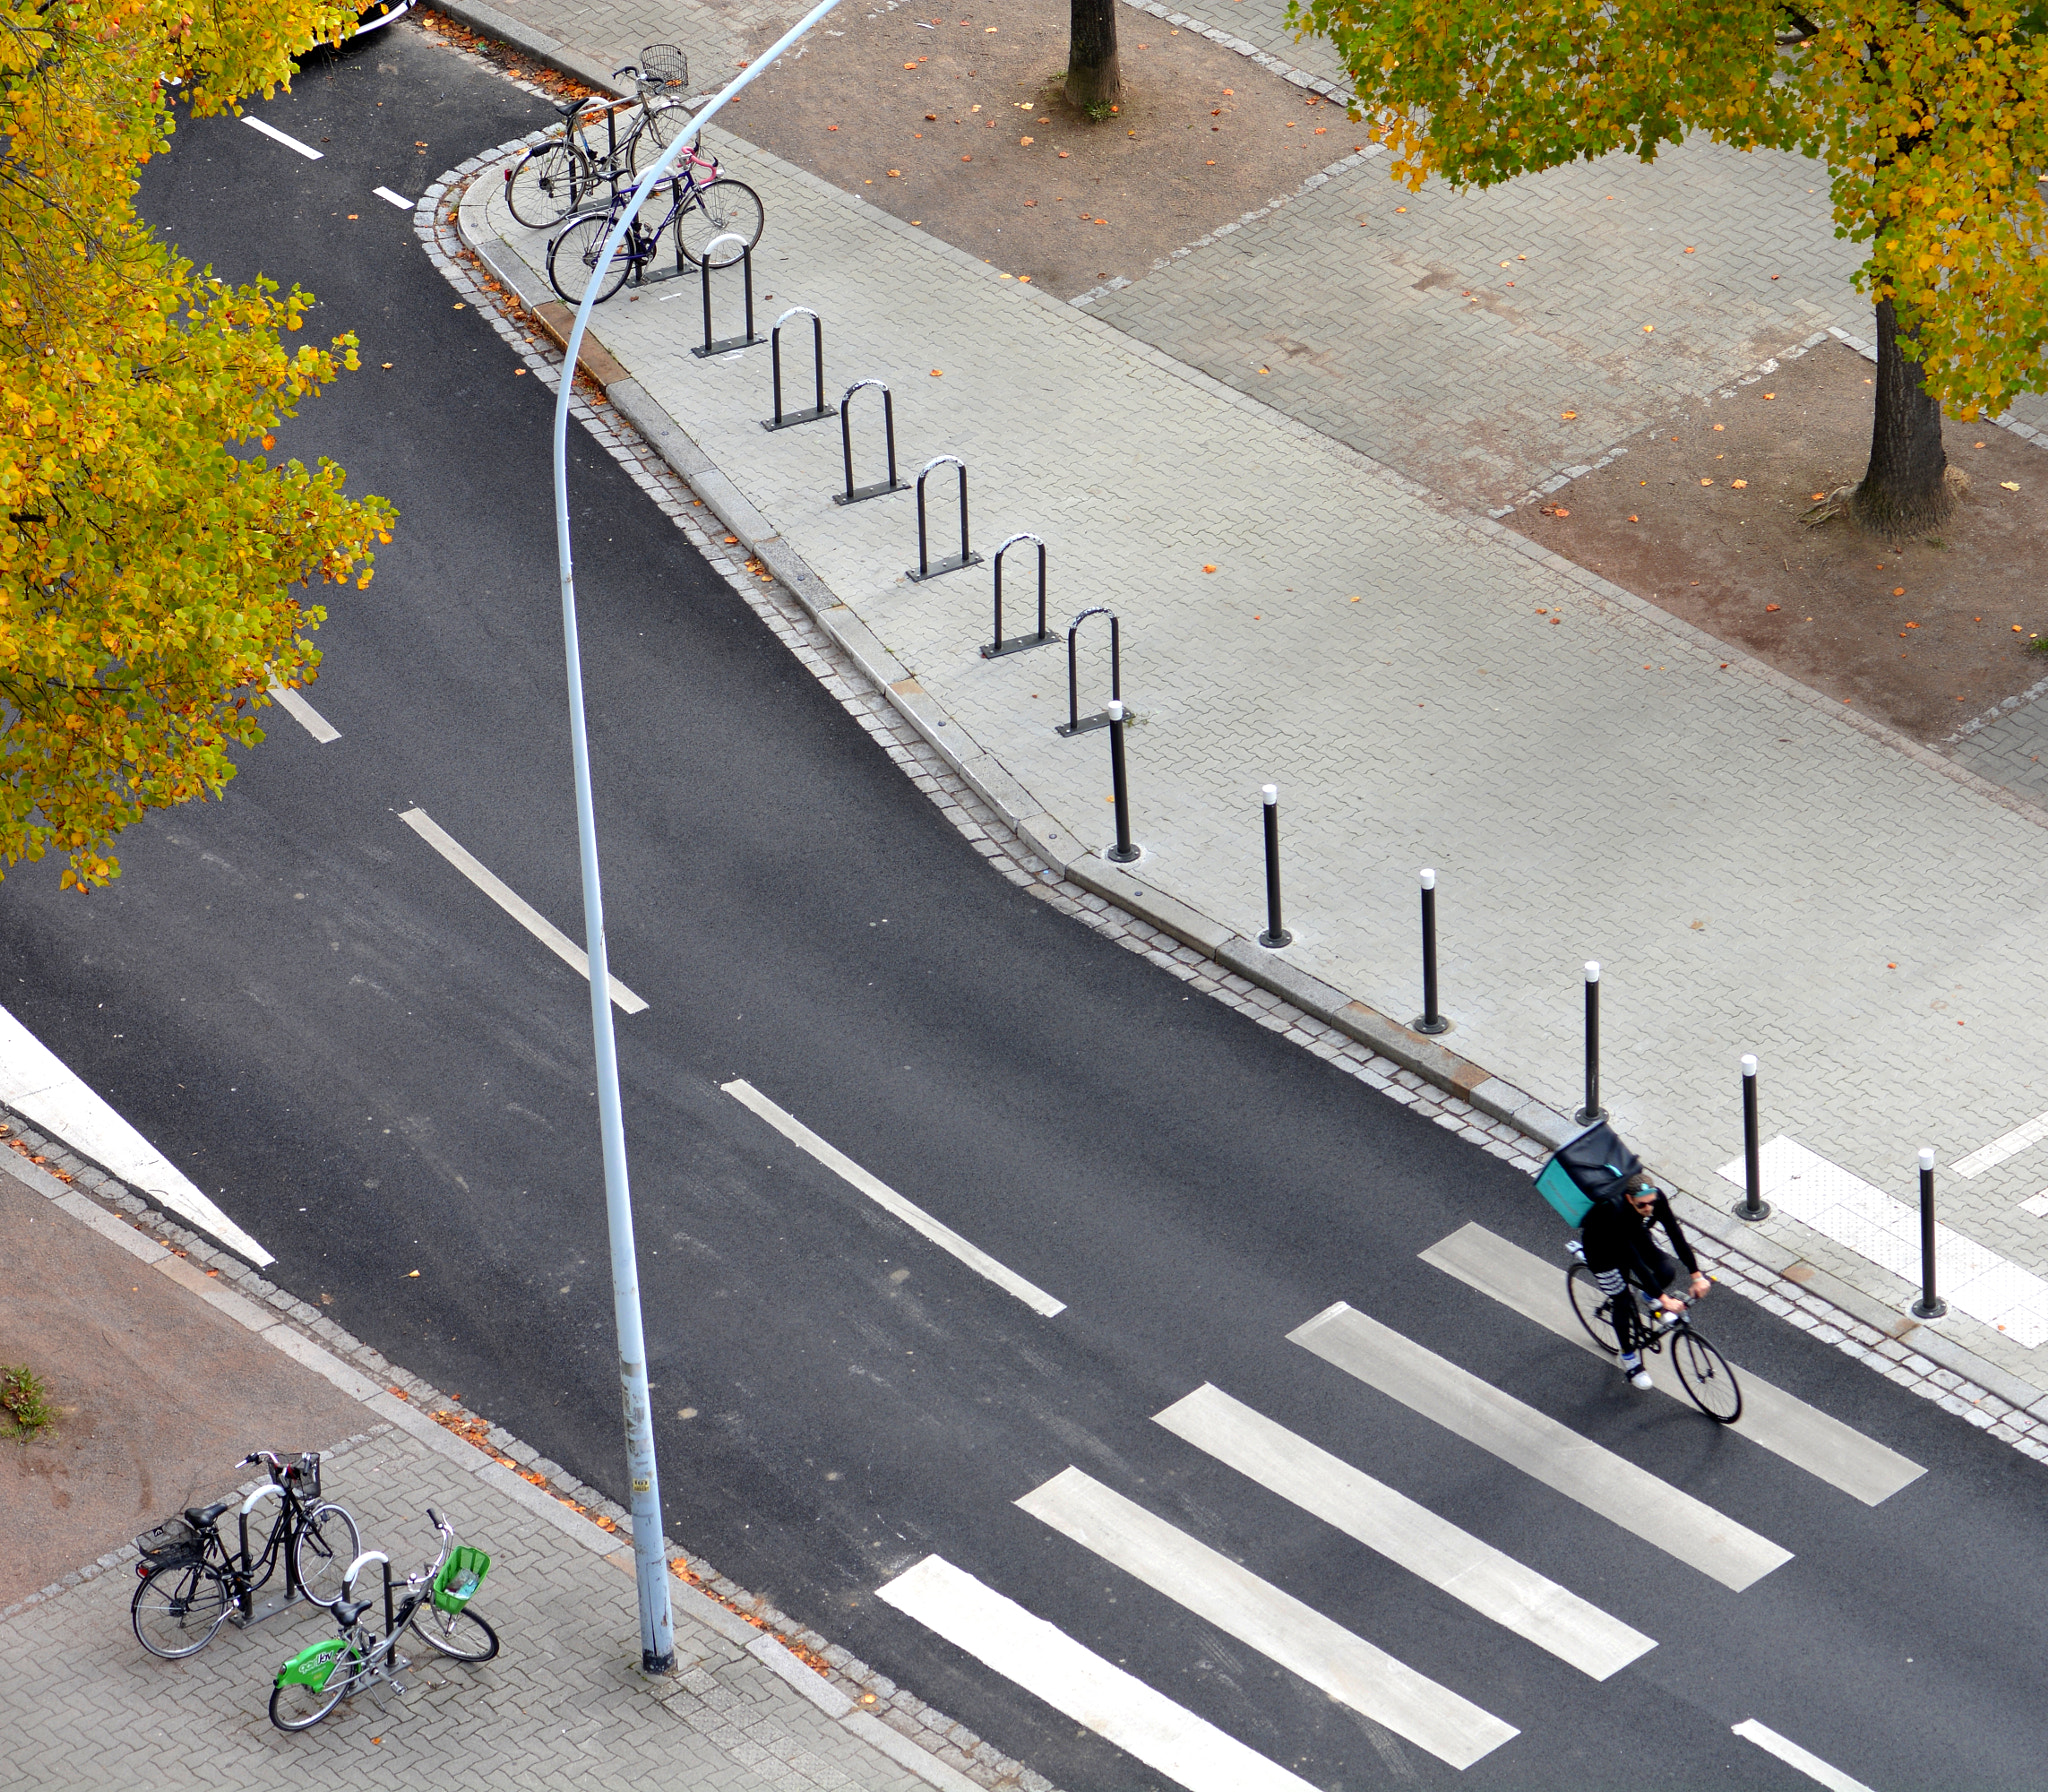 Nikon D5200 + Nikon AF-S Micro-Nikkor 105mm F2.8G IF-ED VR sample photo. The square of 5 bicycles photography